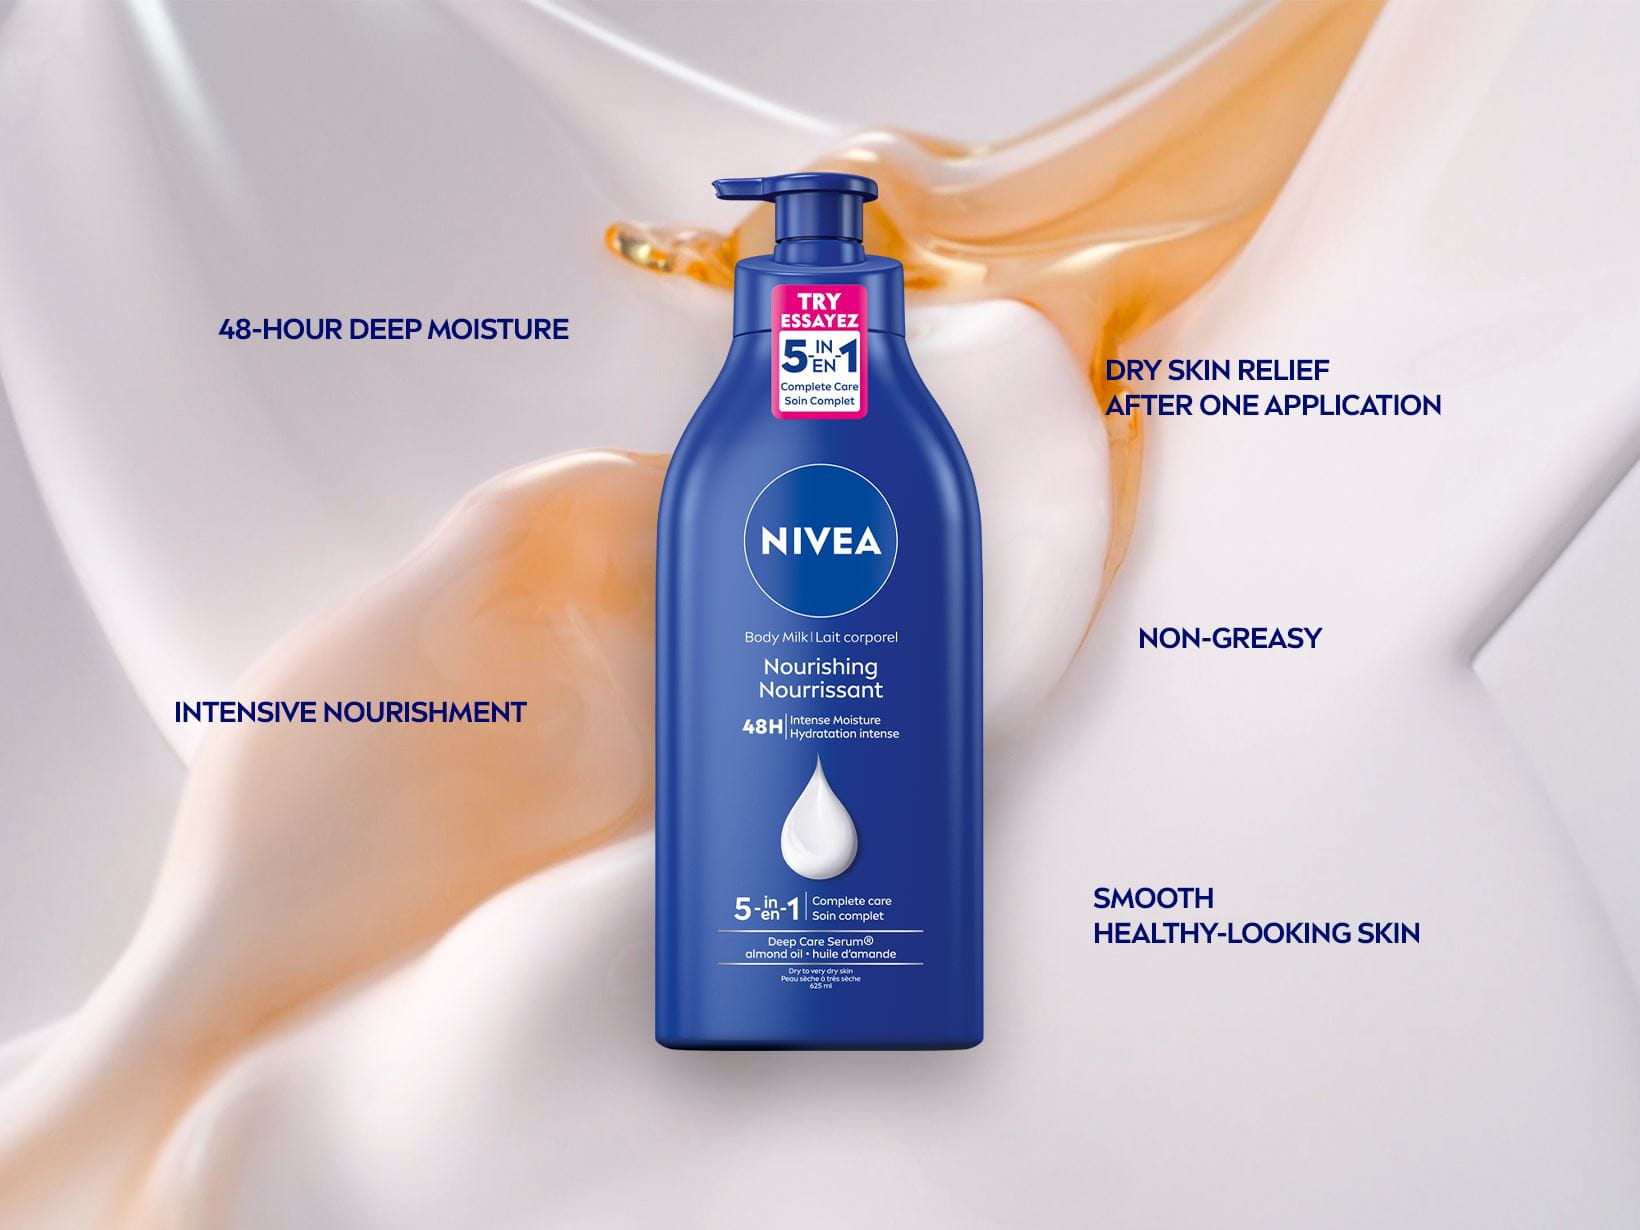 View of a NIVEA Nourishing Body Milk with 5-in-1 Complete Care product with product text displayed over a white and orange artistic background.